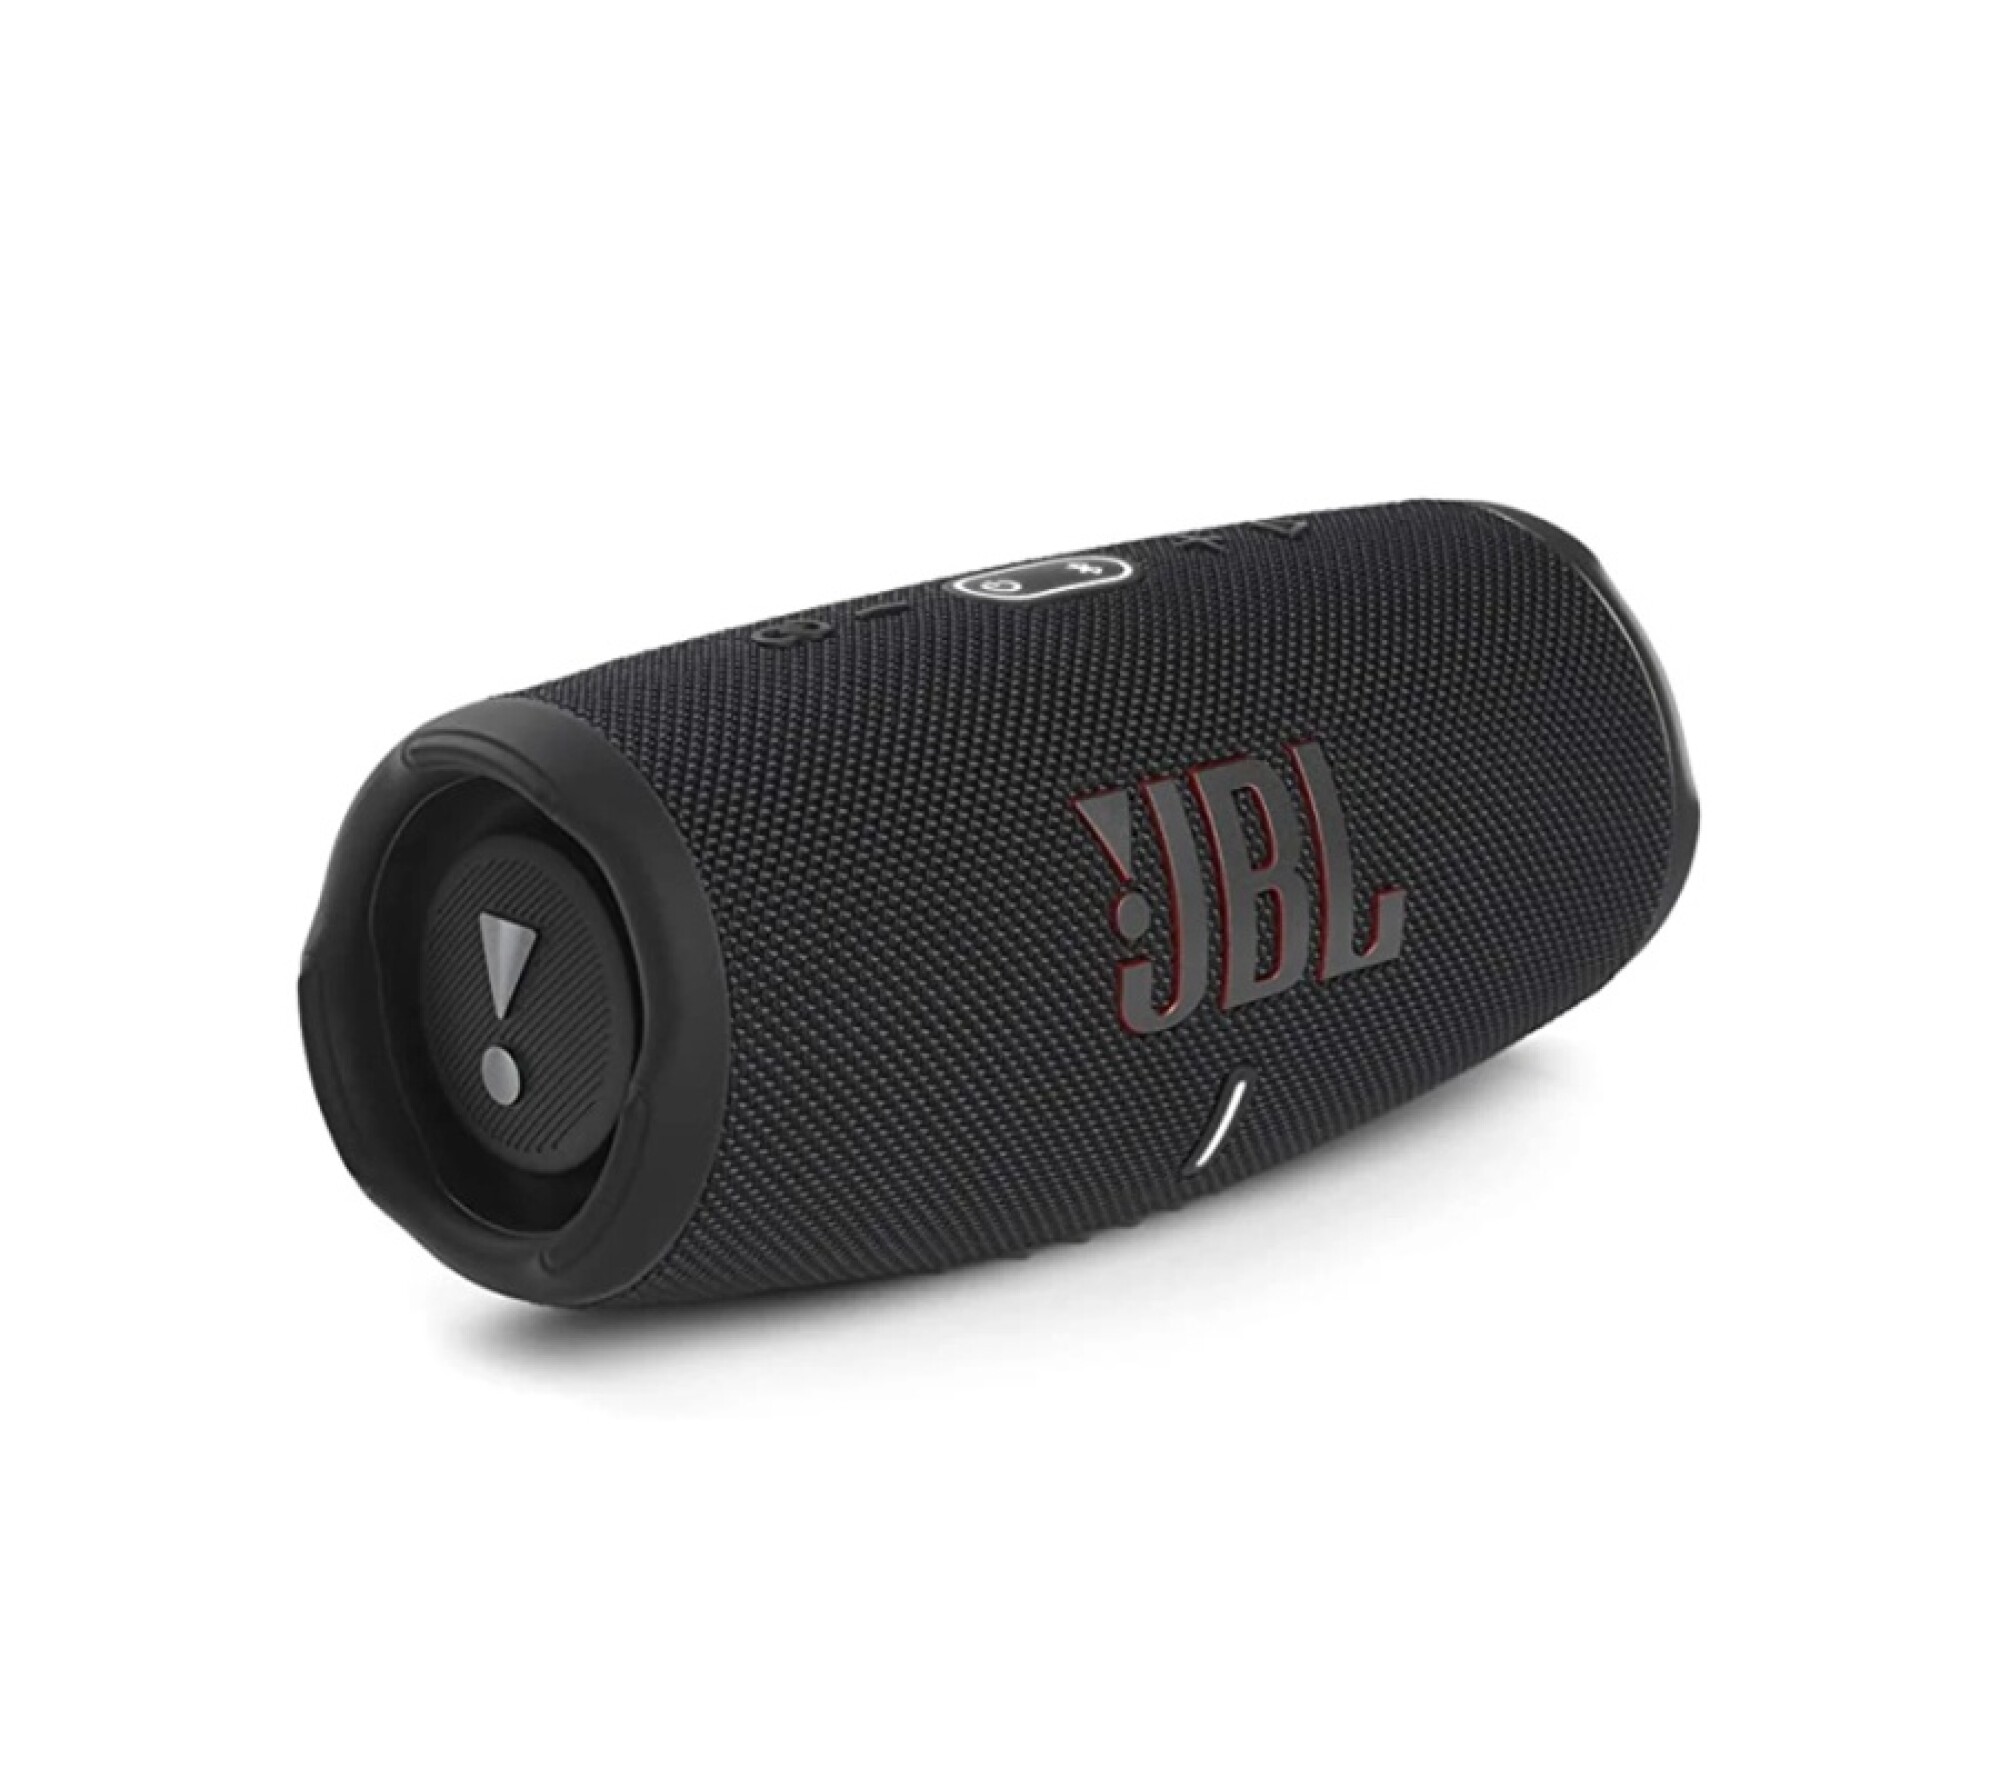 Parlante Altavoces Bluetooth JBL Charge 5 - Parlantes Bluetooth